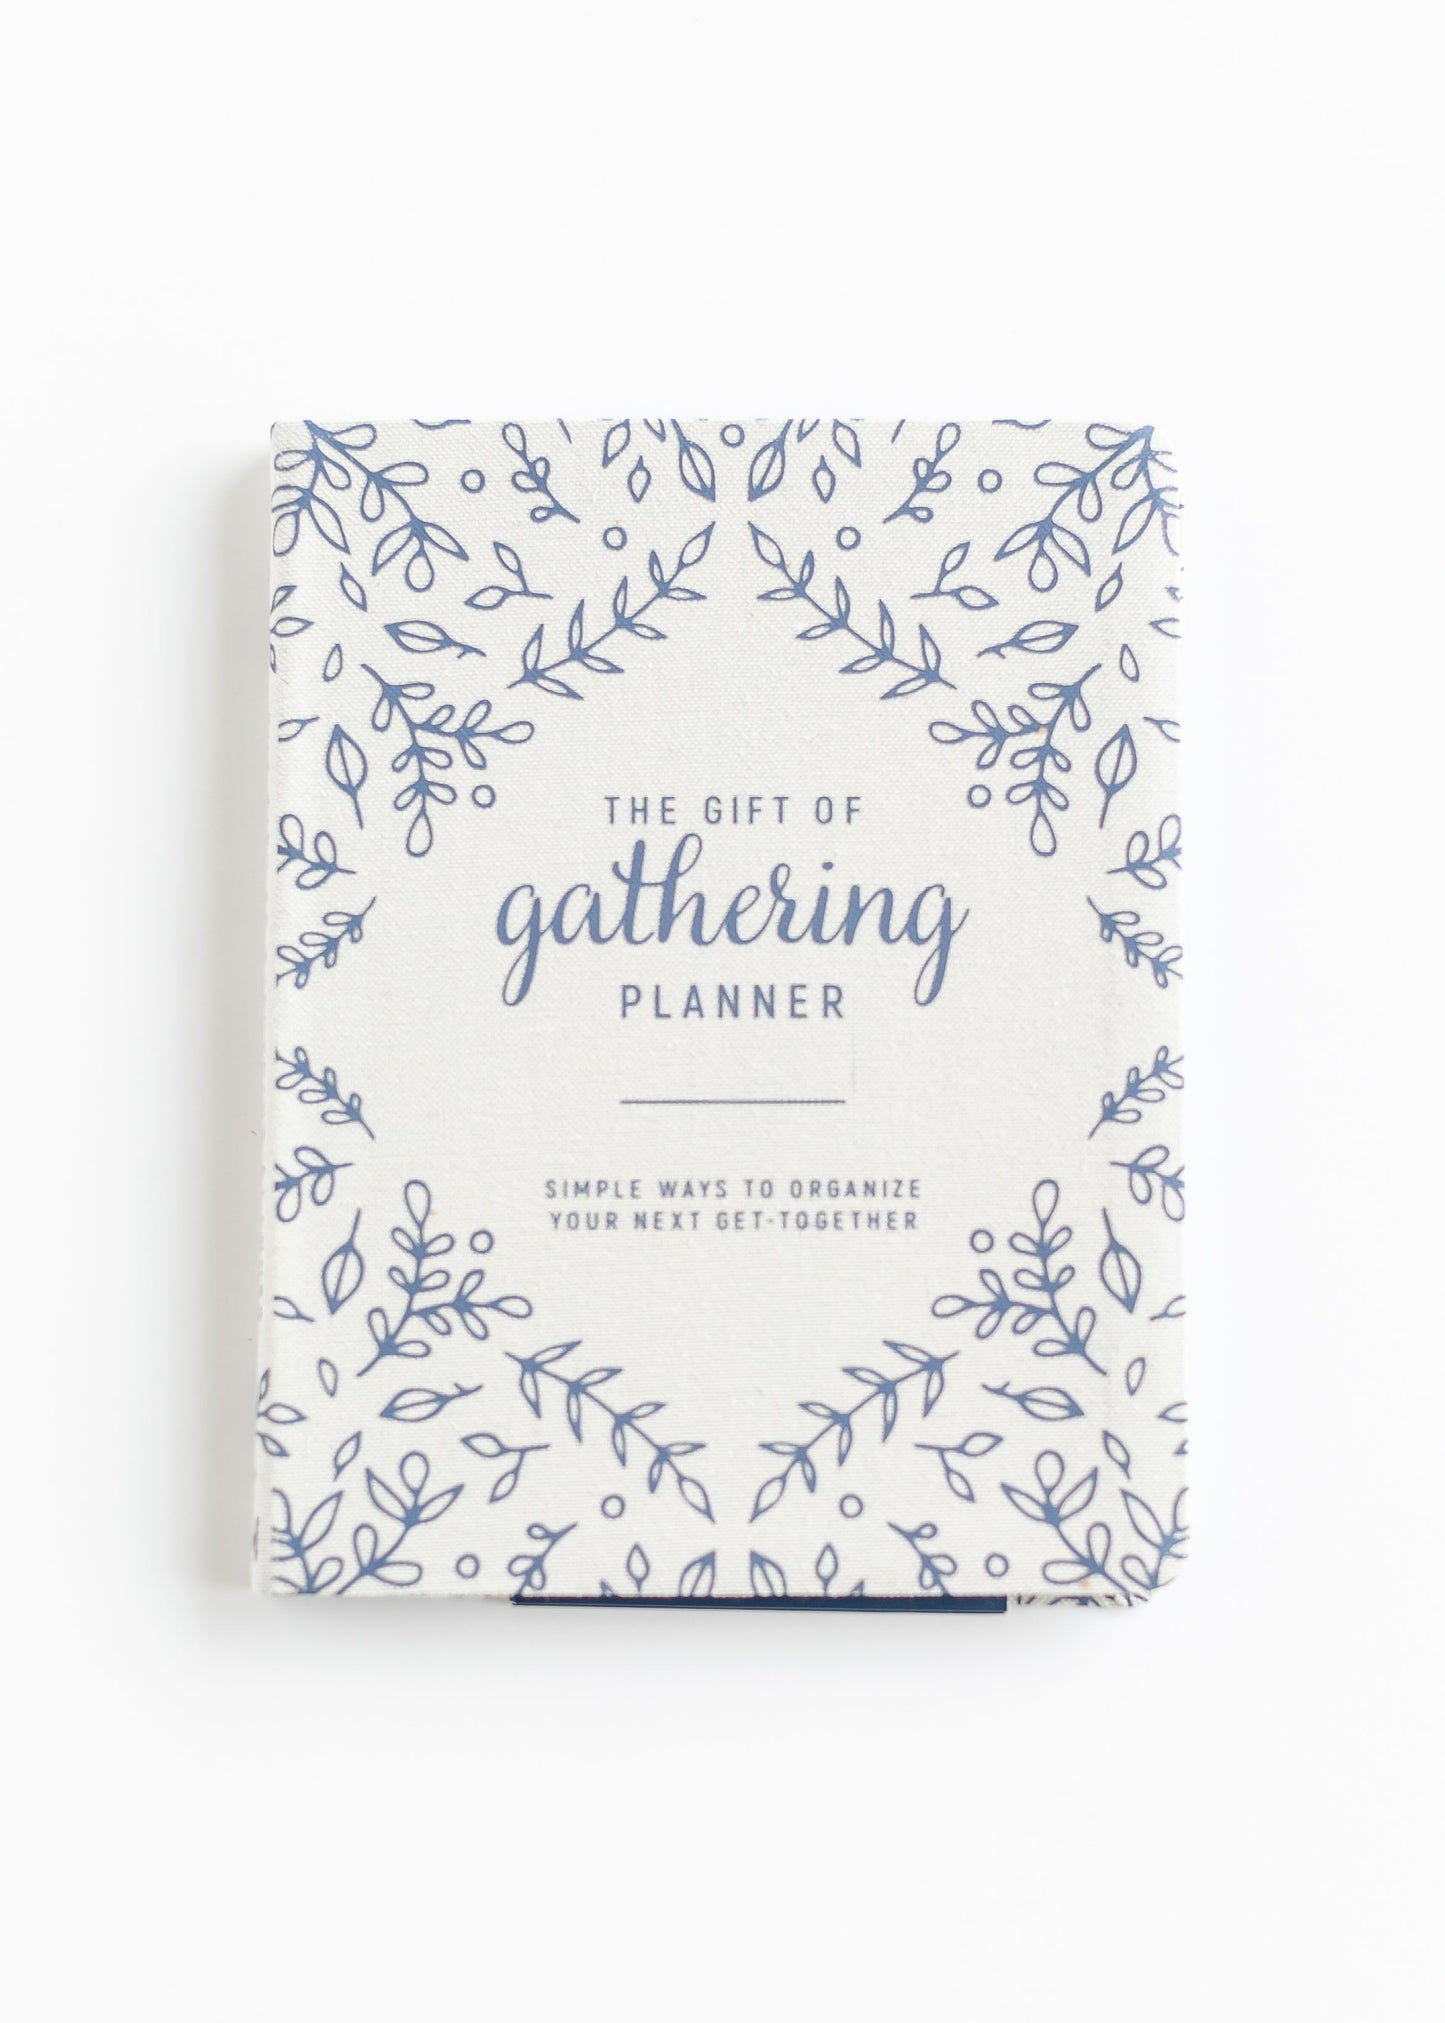 The Gift of Gathering Planner Gifts